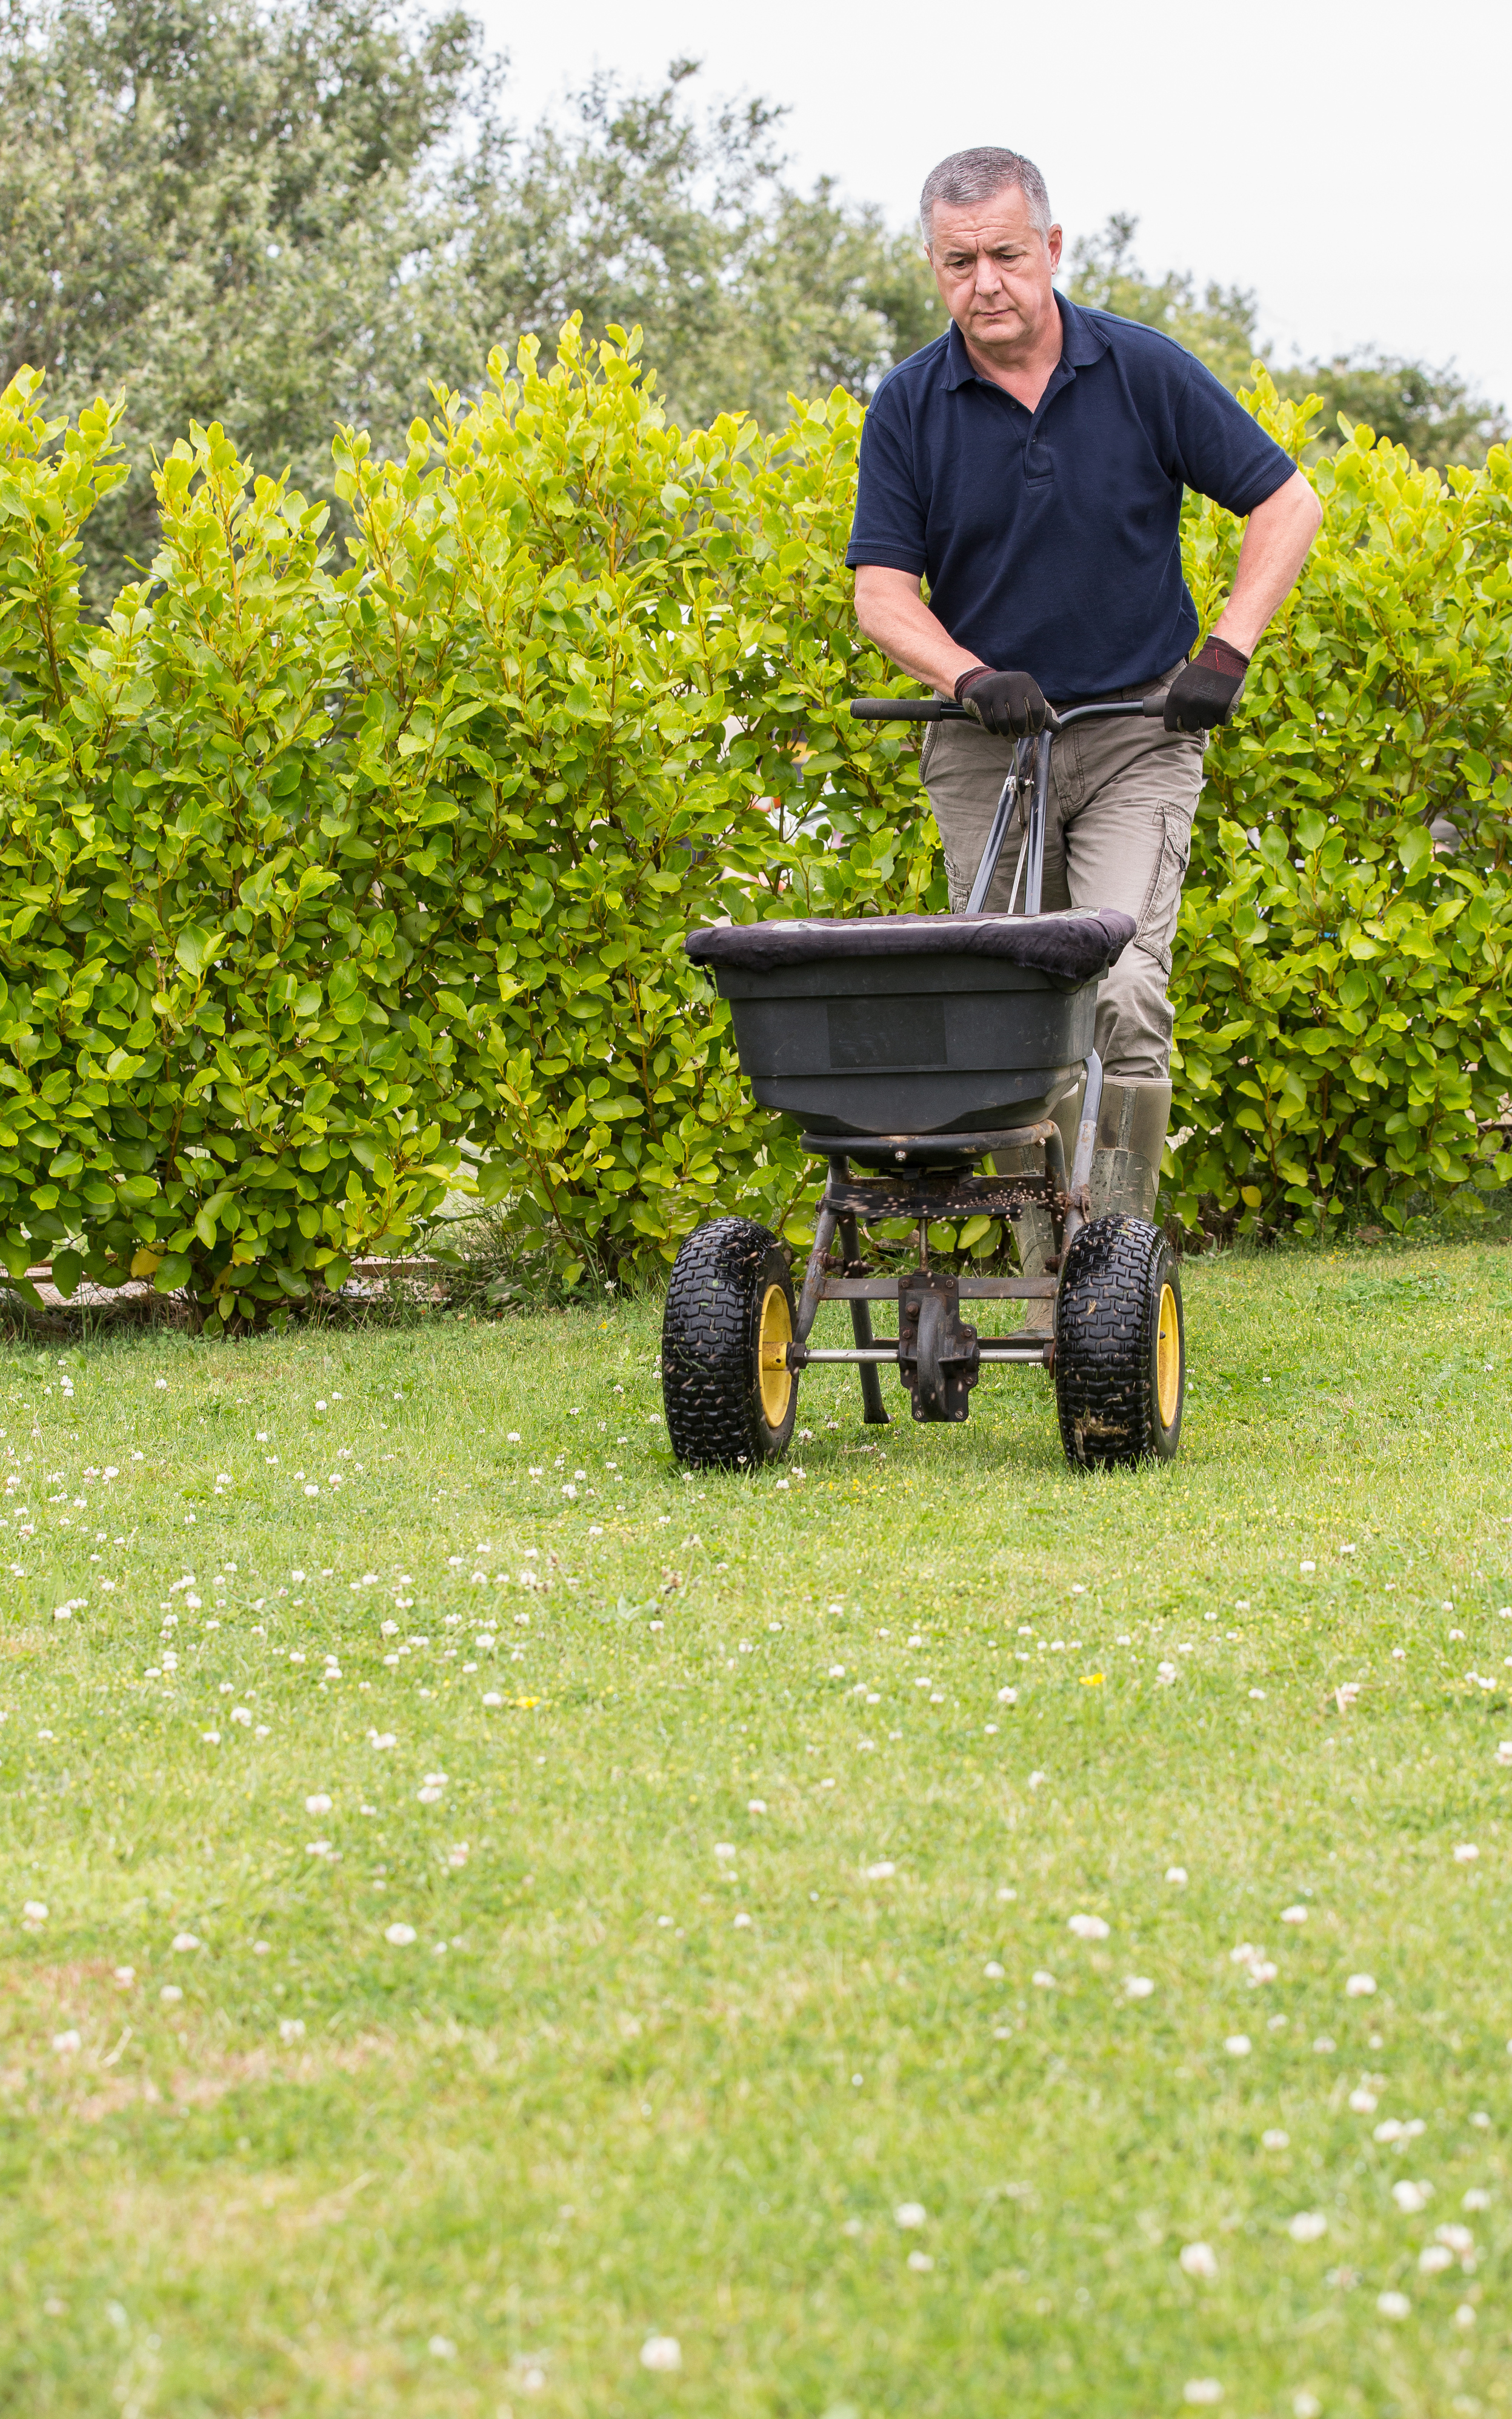 Feed your lawn (Thinkstock/PA)